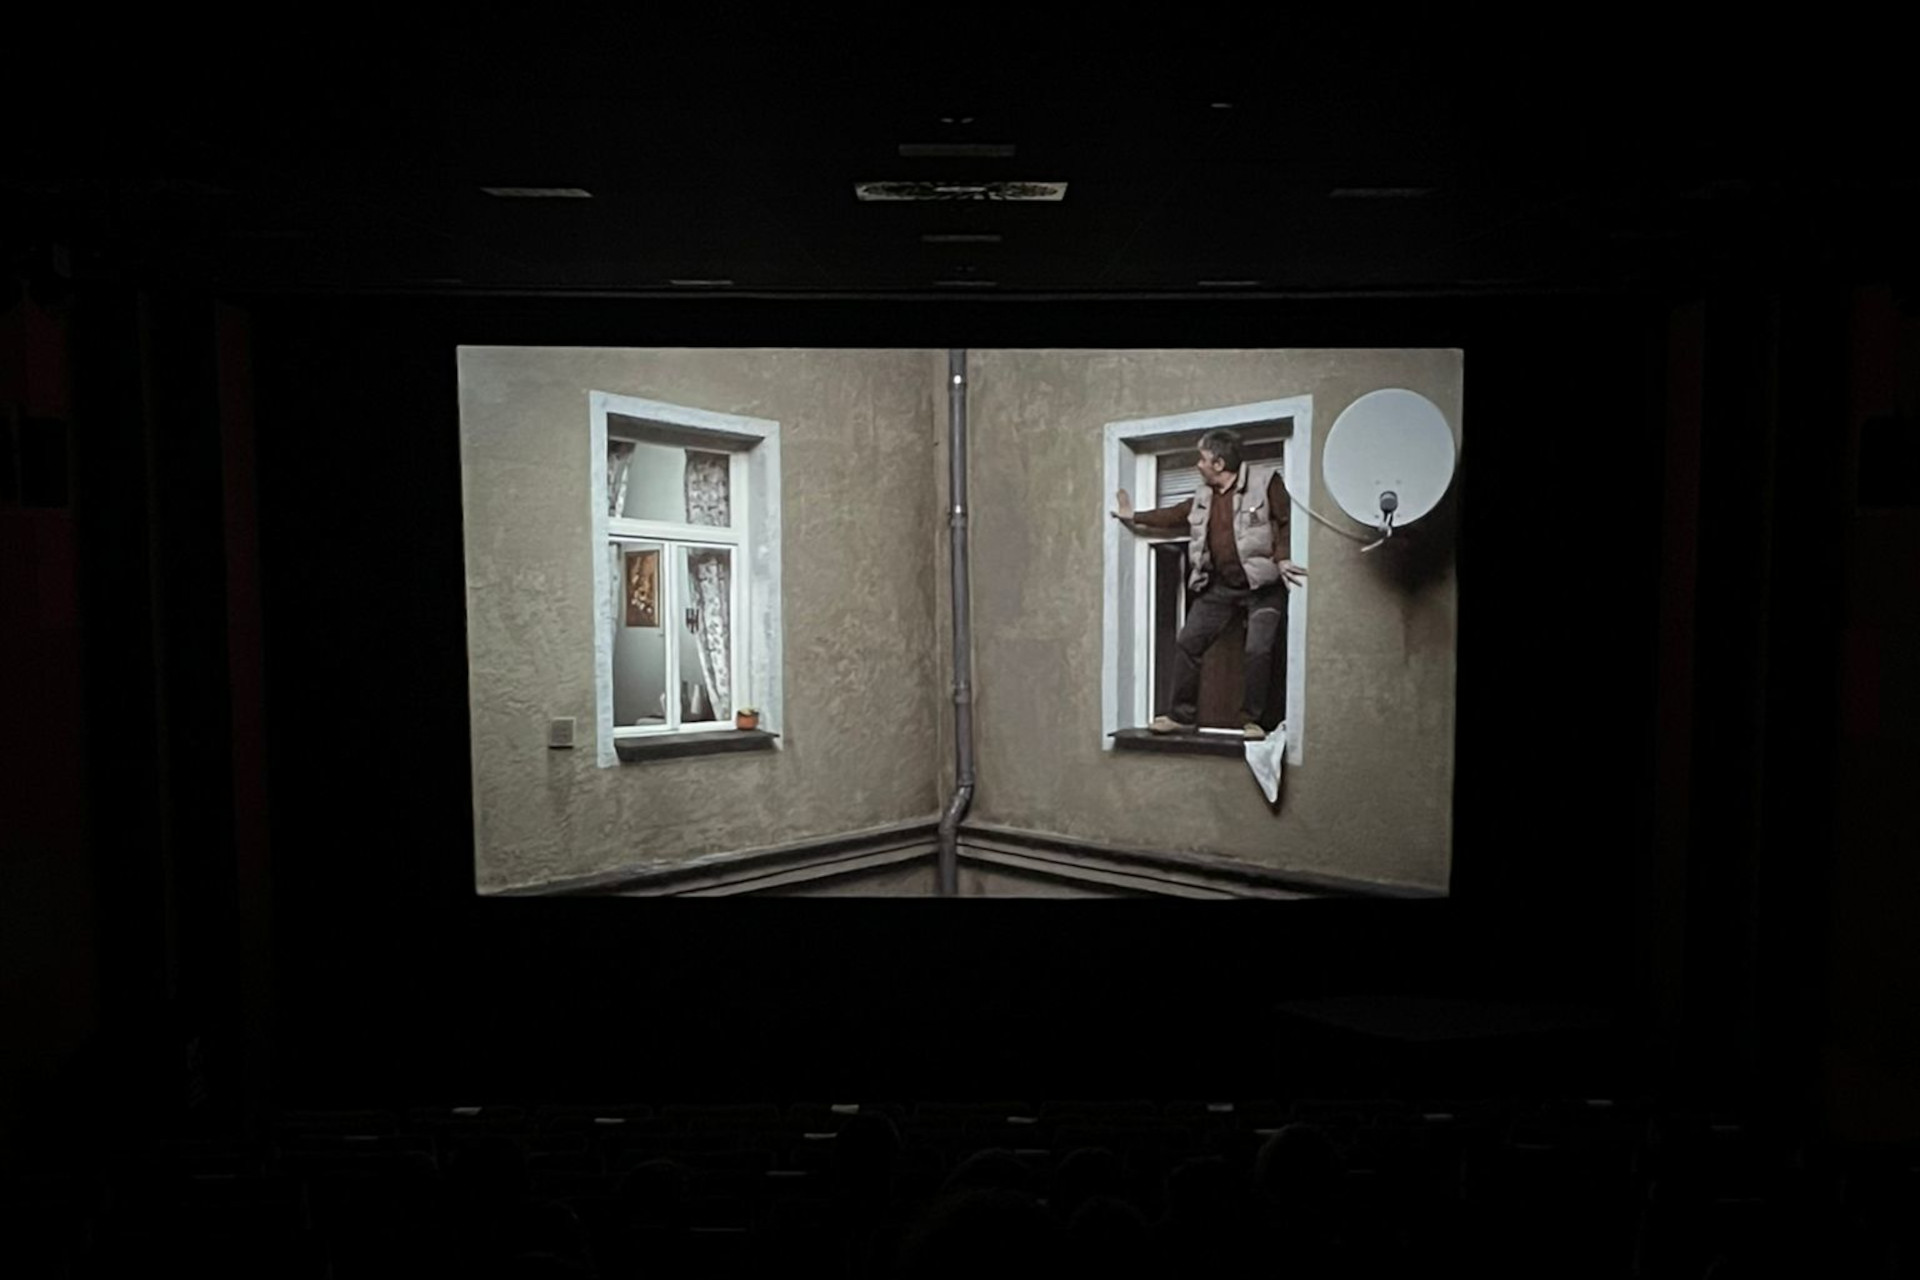 Image from the short film AM FENSTER on the cinema screen